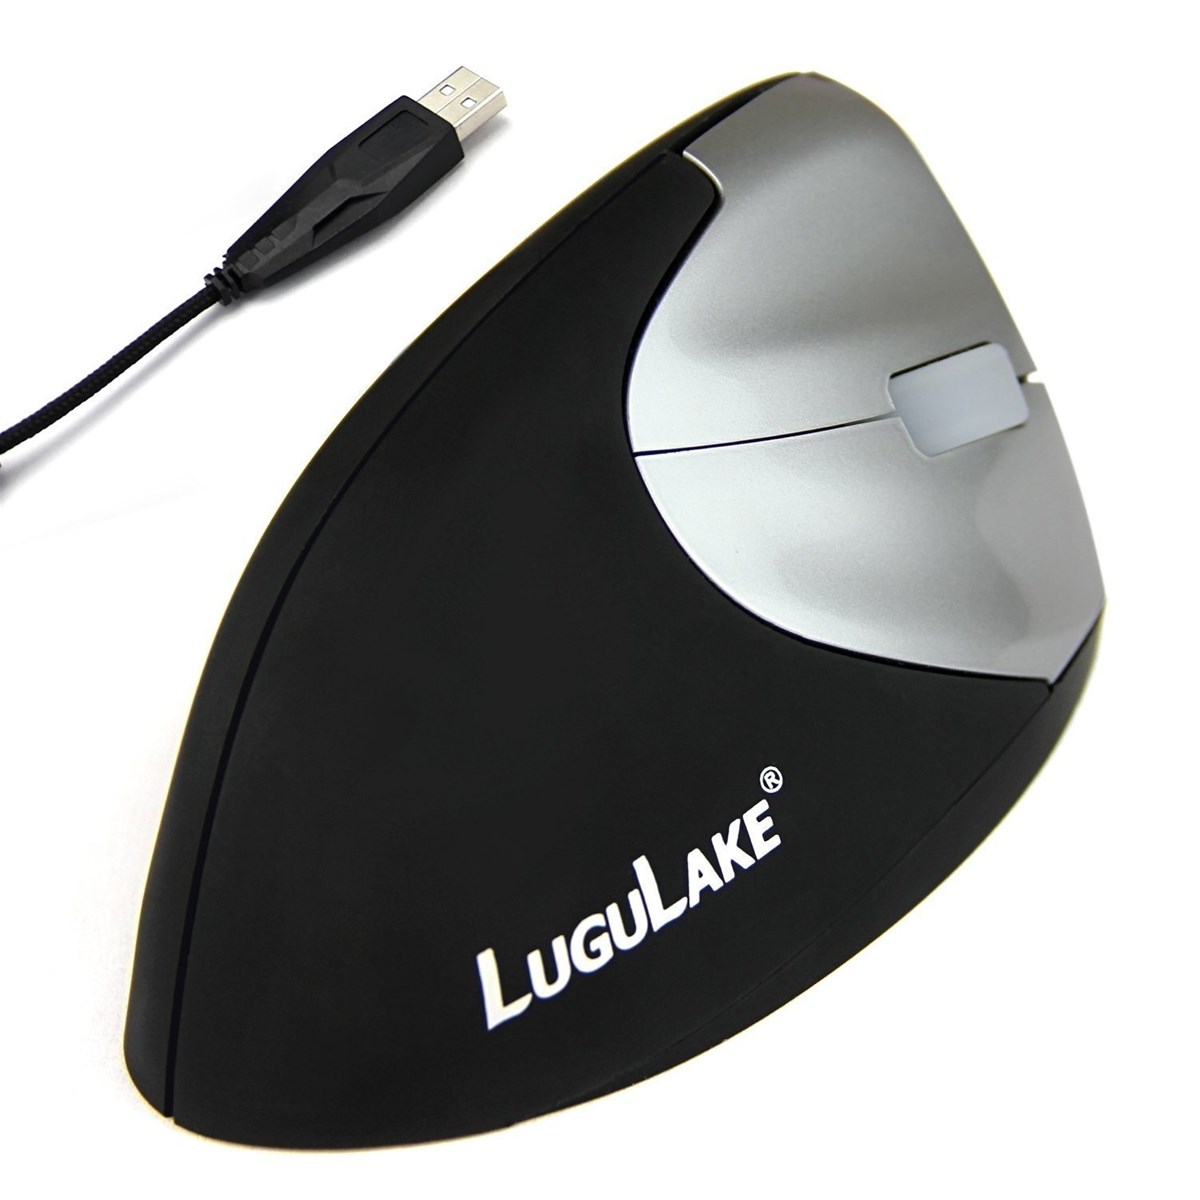 LuguLake Vertical Ergonomic Mouse Optical Mice Wired Right Hand Stress Relieving Black